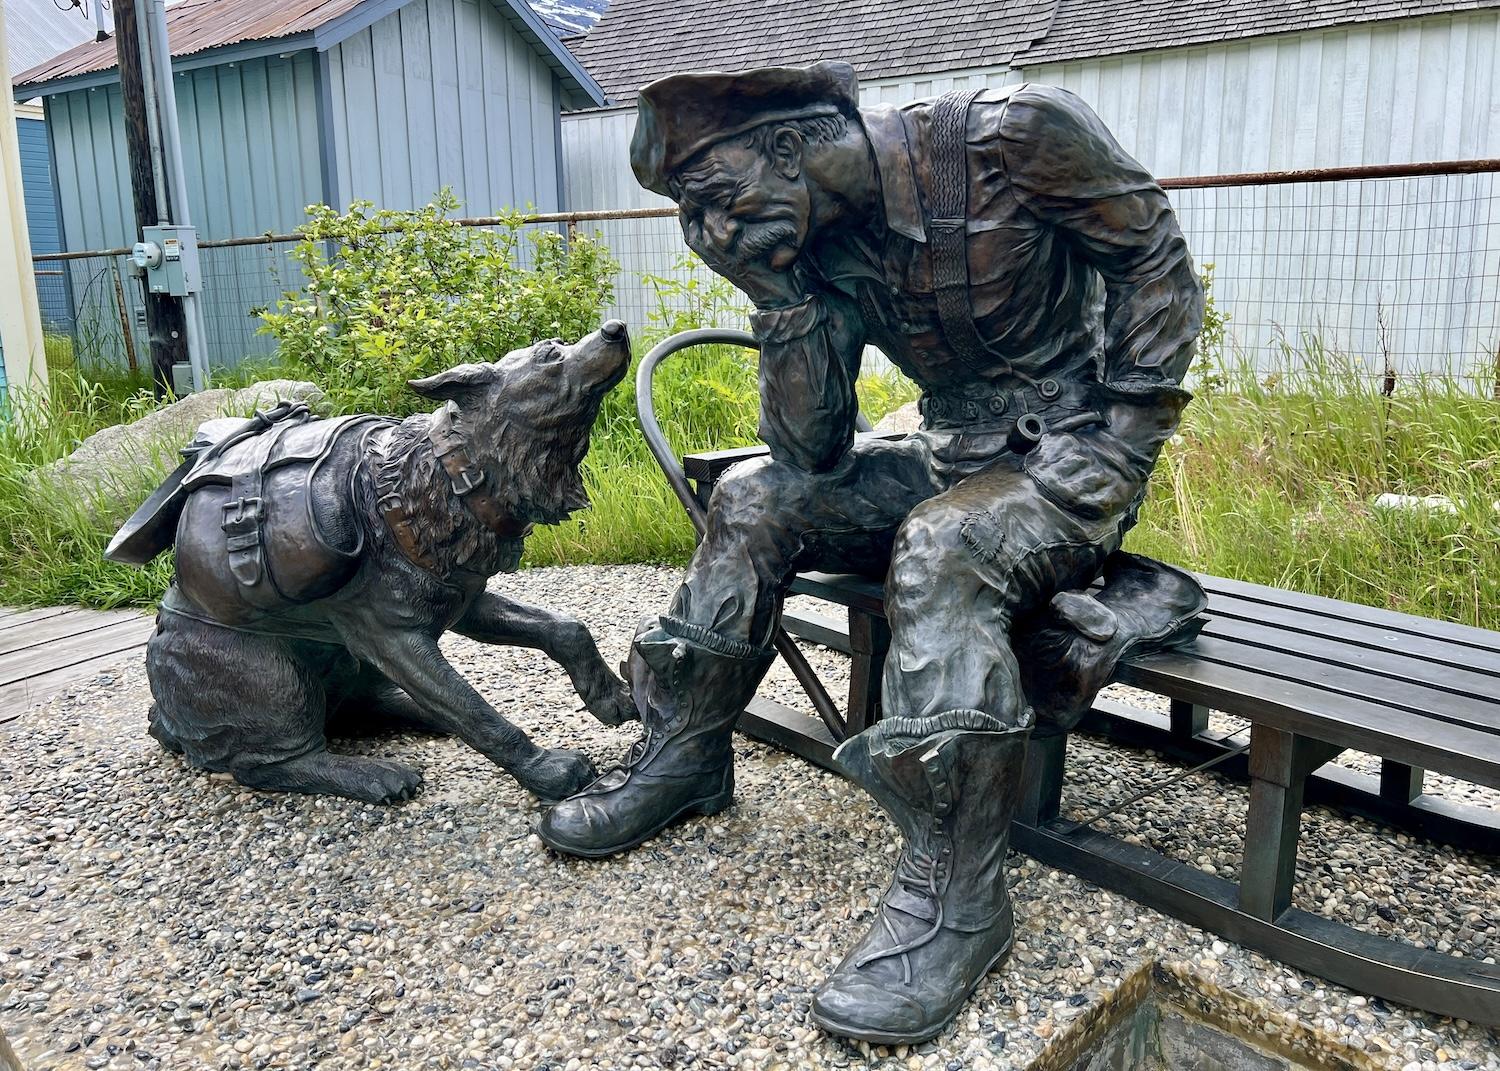 In Skagway, Peter Lucchetti's "Stampeder Statue" shows a man, dog and sled from the Klondike gold rush era.